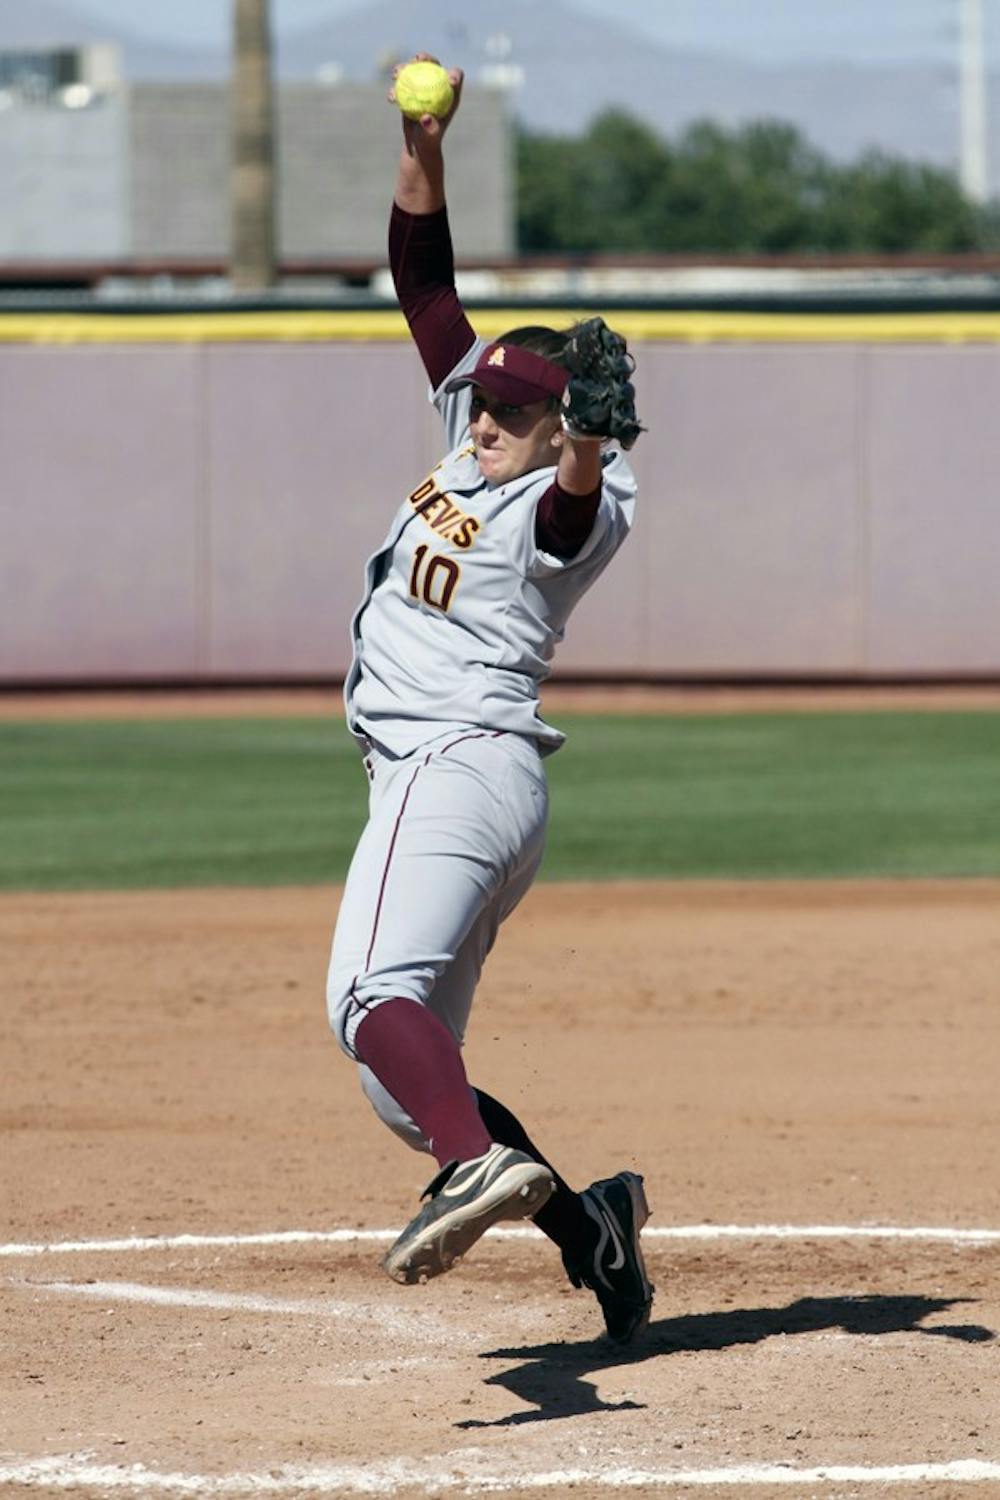 Hillary Bach throws a pitch in a game against New Mexico State on March 11. Bach is 15-0 with a 1.13 ERA. (Photo by Sam Rosenbaum)